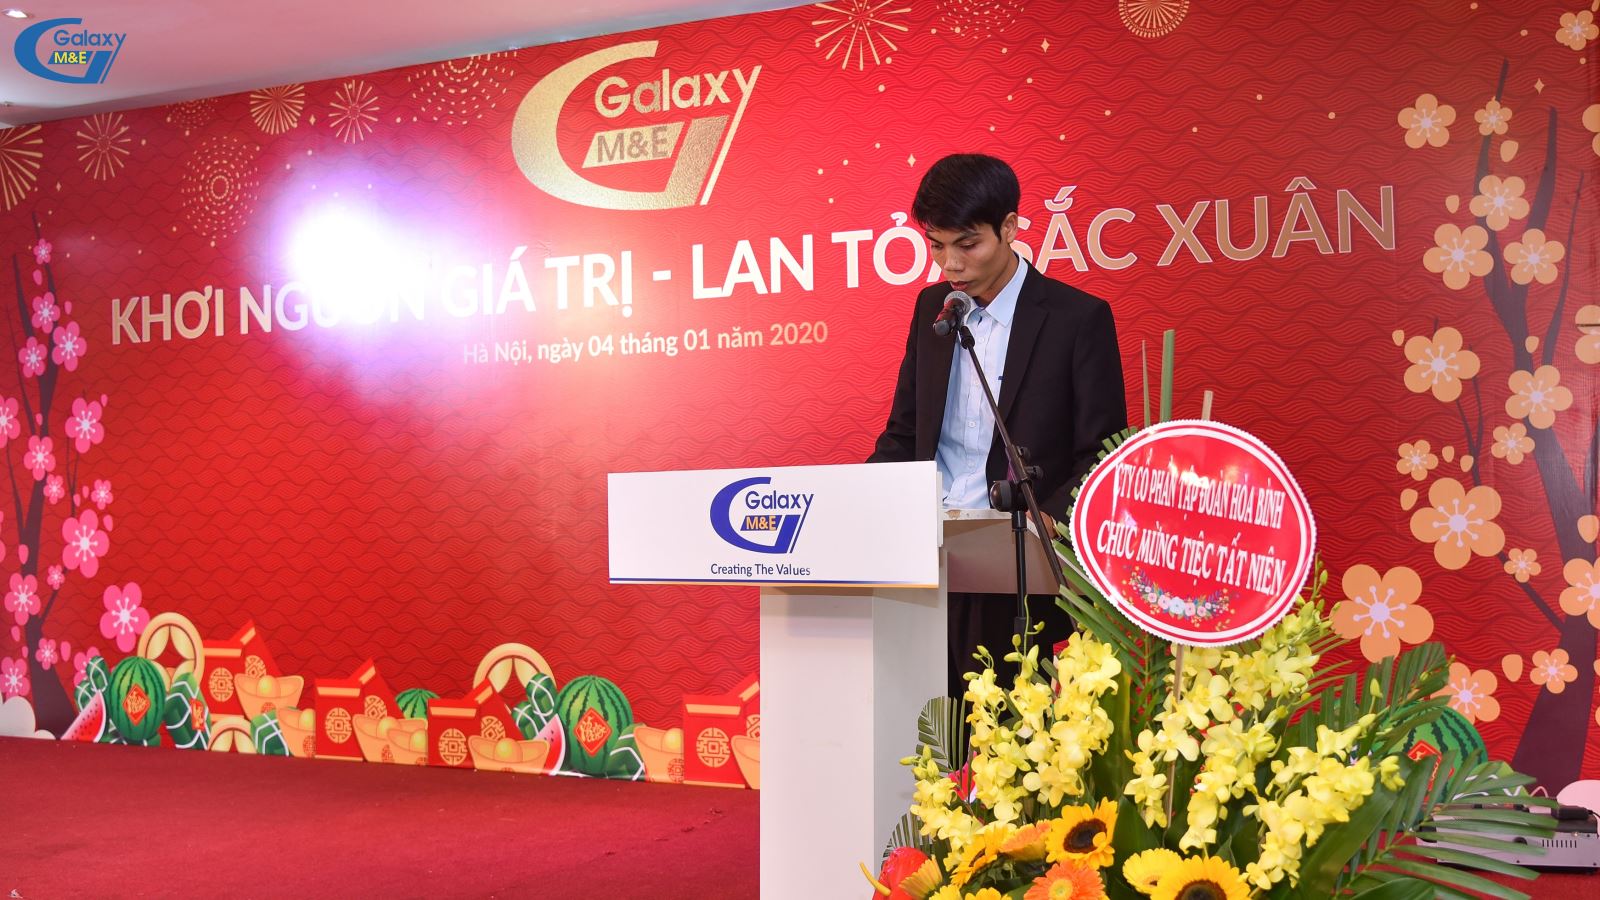 Mr. Nguyen Van Nam, on behalf of the Board of Directors, announced the decision to reward promising members and individuals who have contributed to the cause of building Galaxy M&E to become stronger and more prestigious.